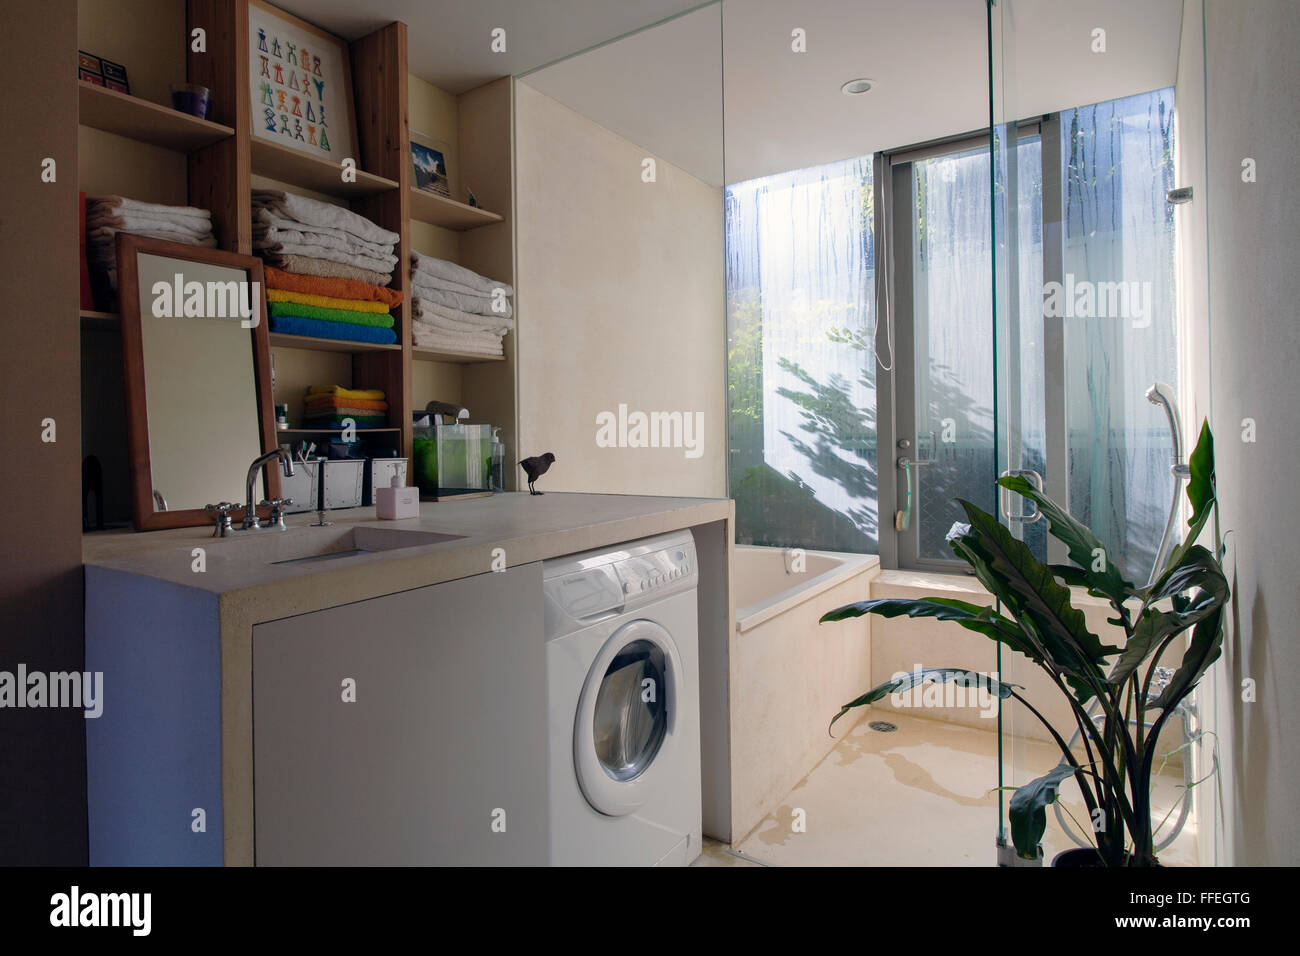 Japanese contemporary bathroom in an apartment with laundry machine Stock Photo